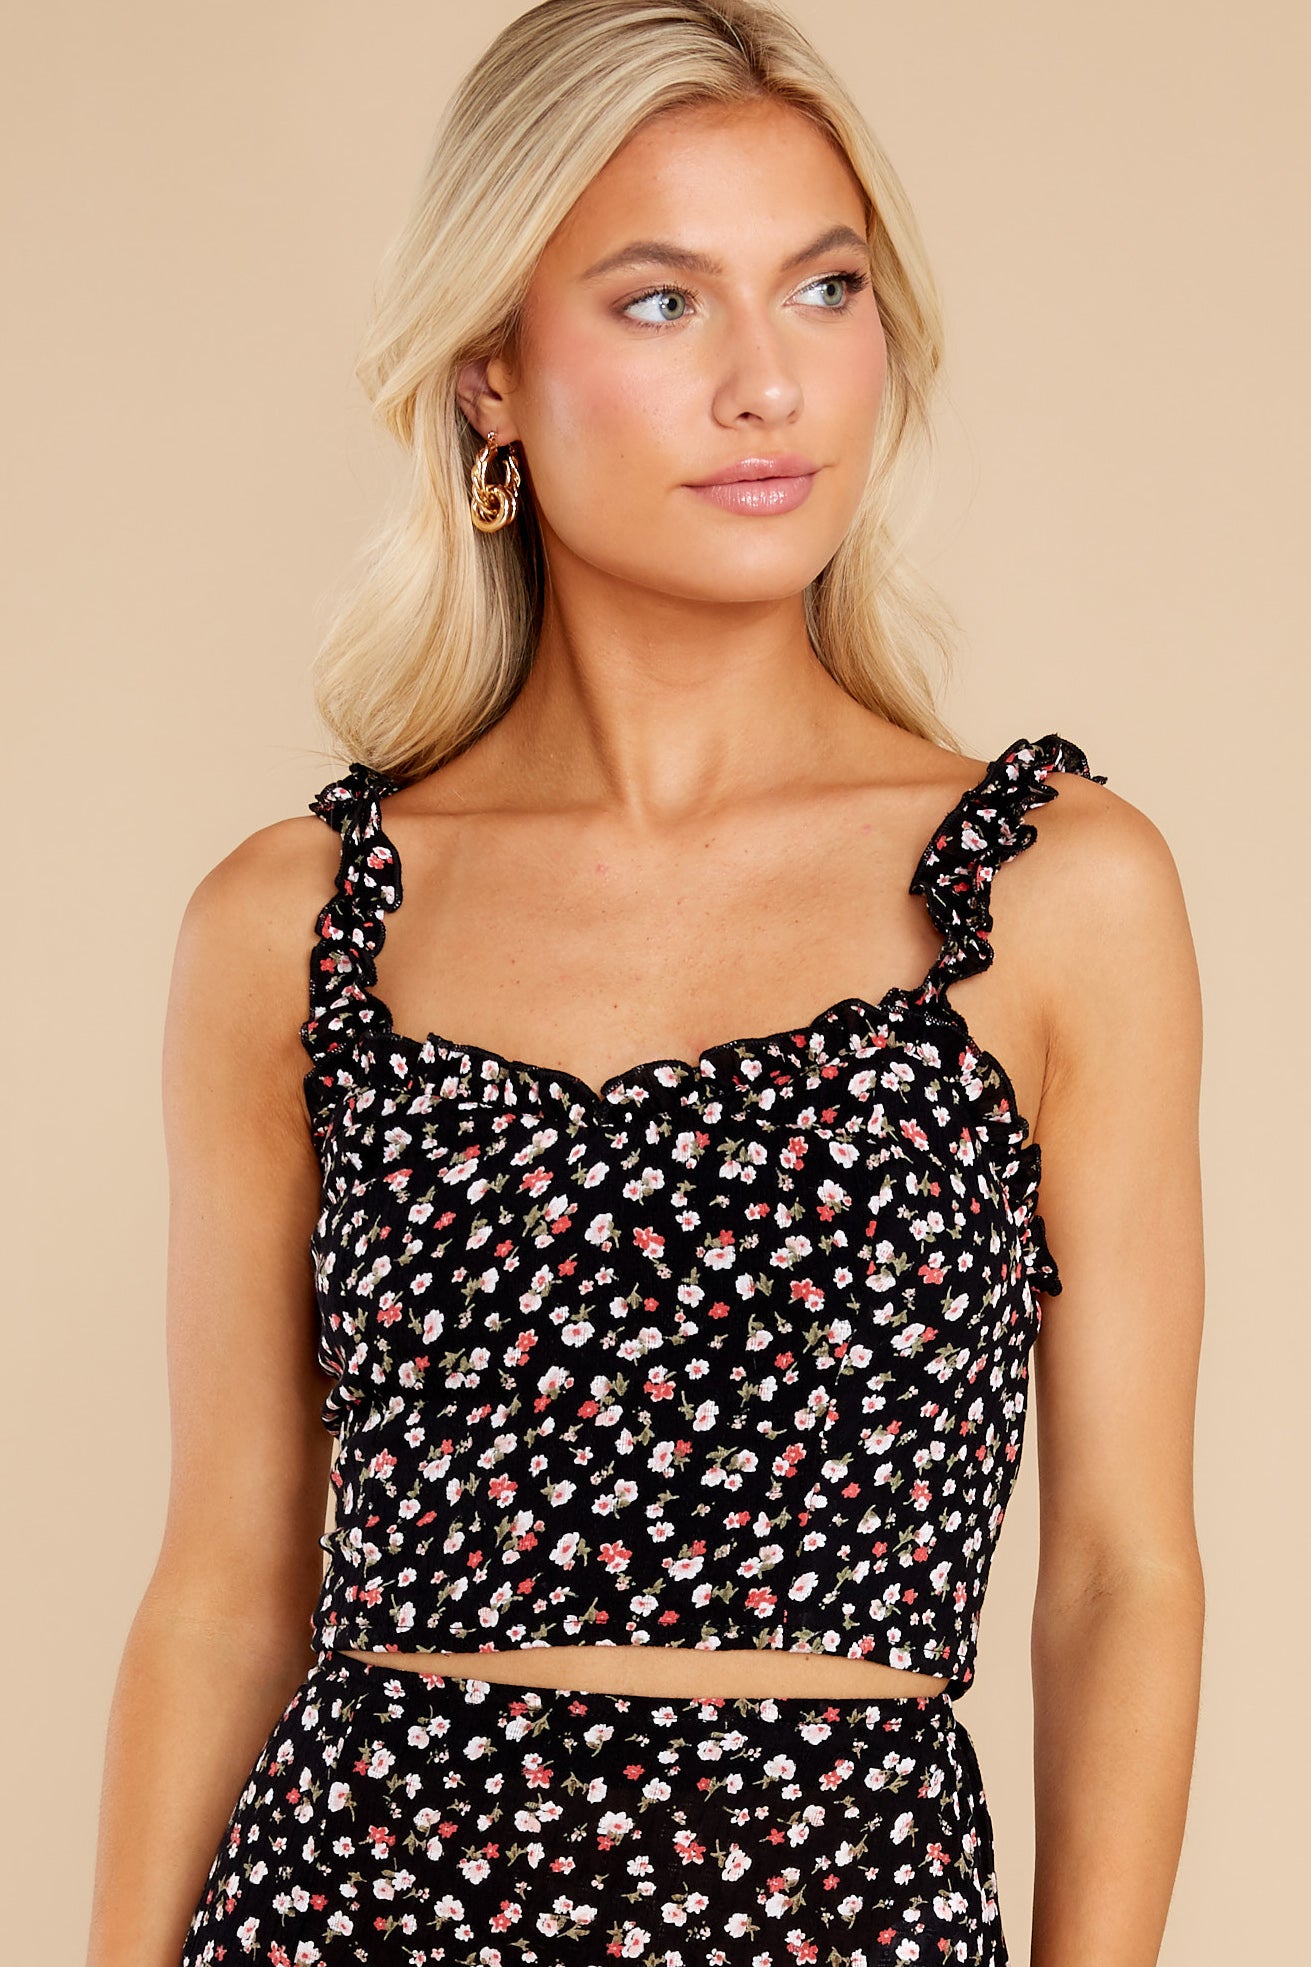 6 Zuma Black And Spiced Coral Floral Ruffle Edge Crop Top at reddress.com